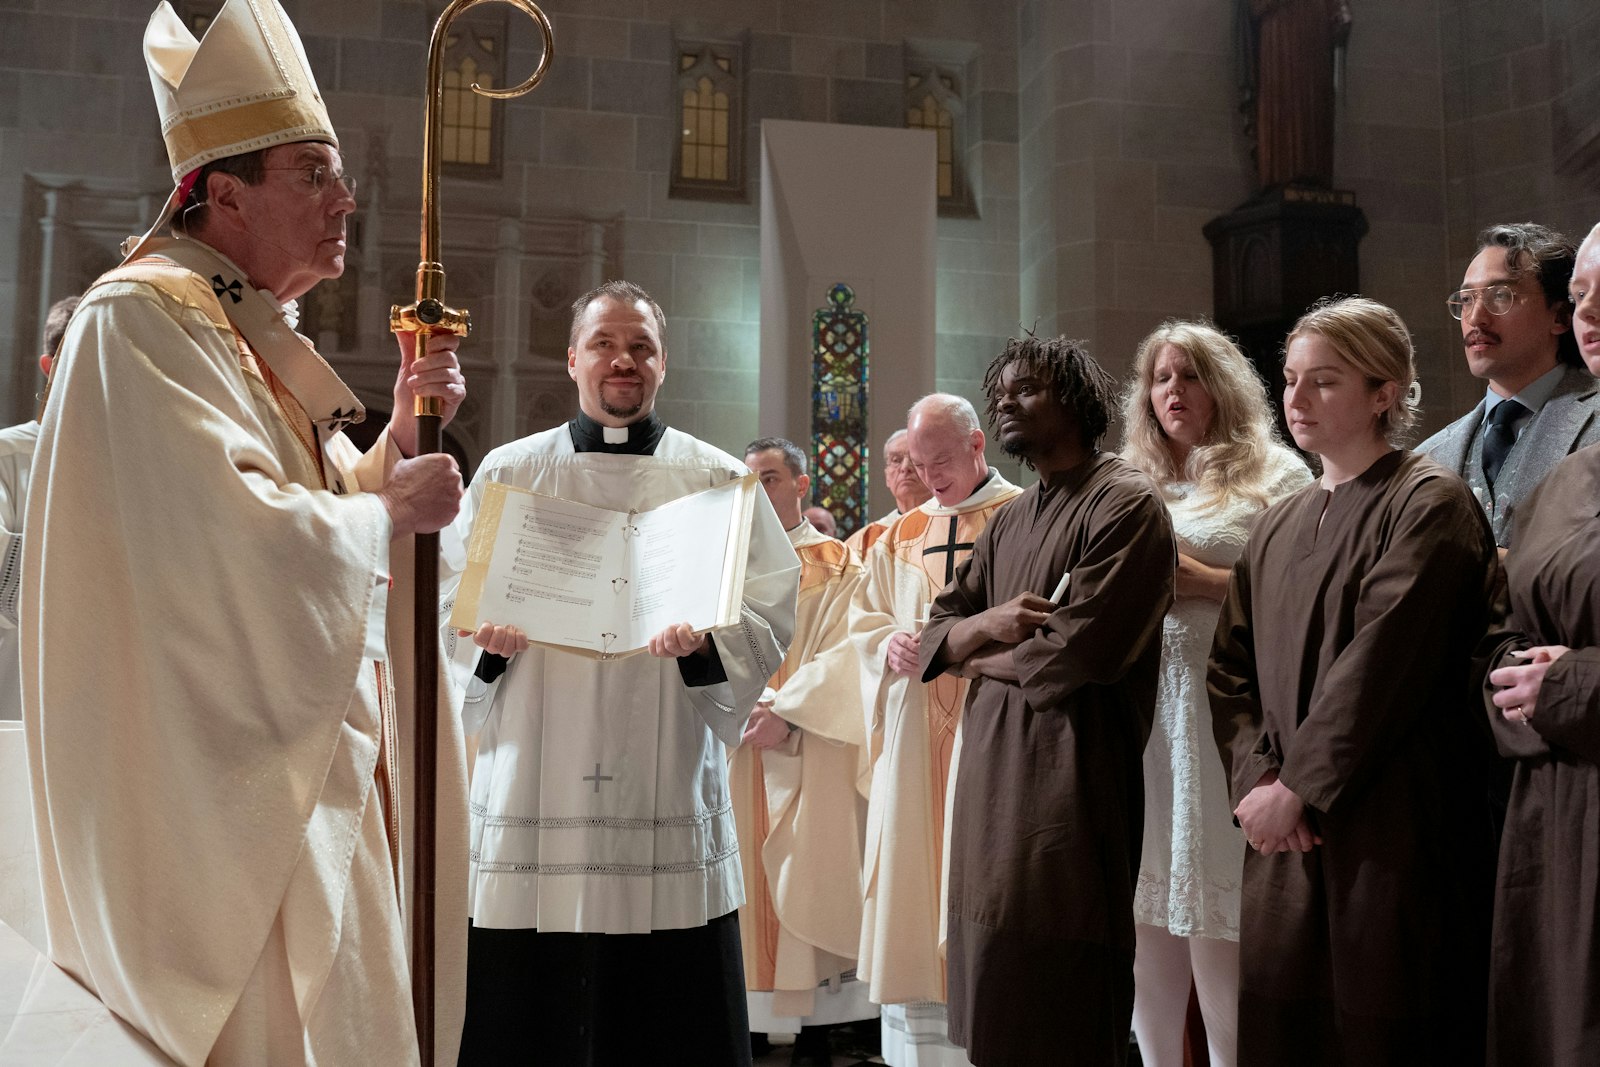 Archbishop Vigneron questions six catechumens preparing to be baptized during the Easter vigil about their intention to join the Catholic Church.